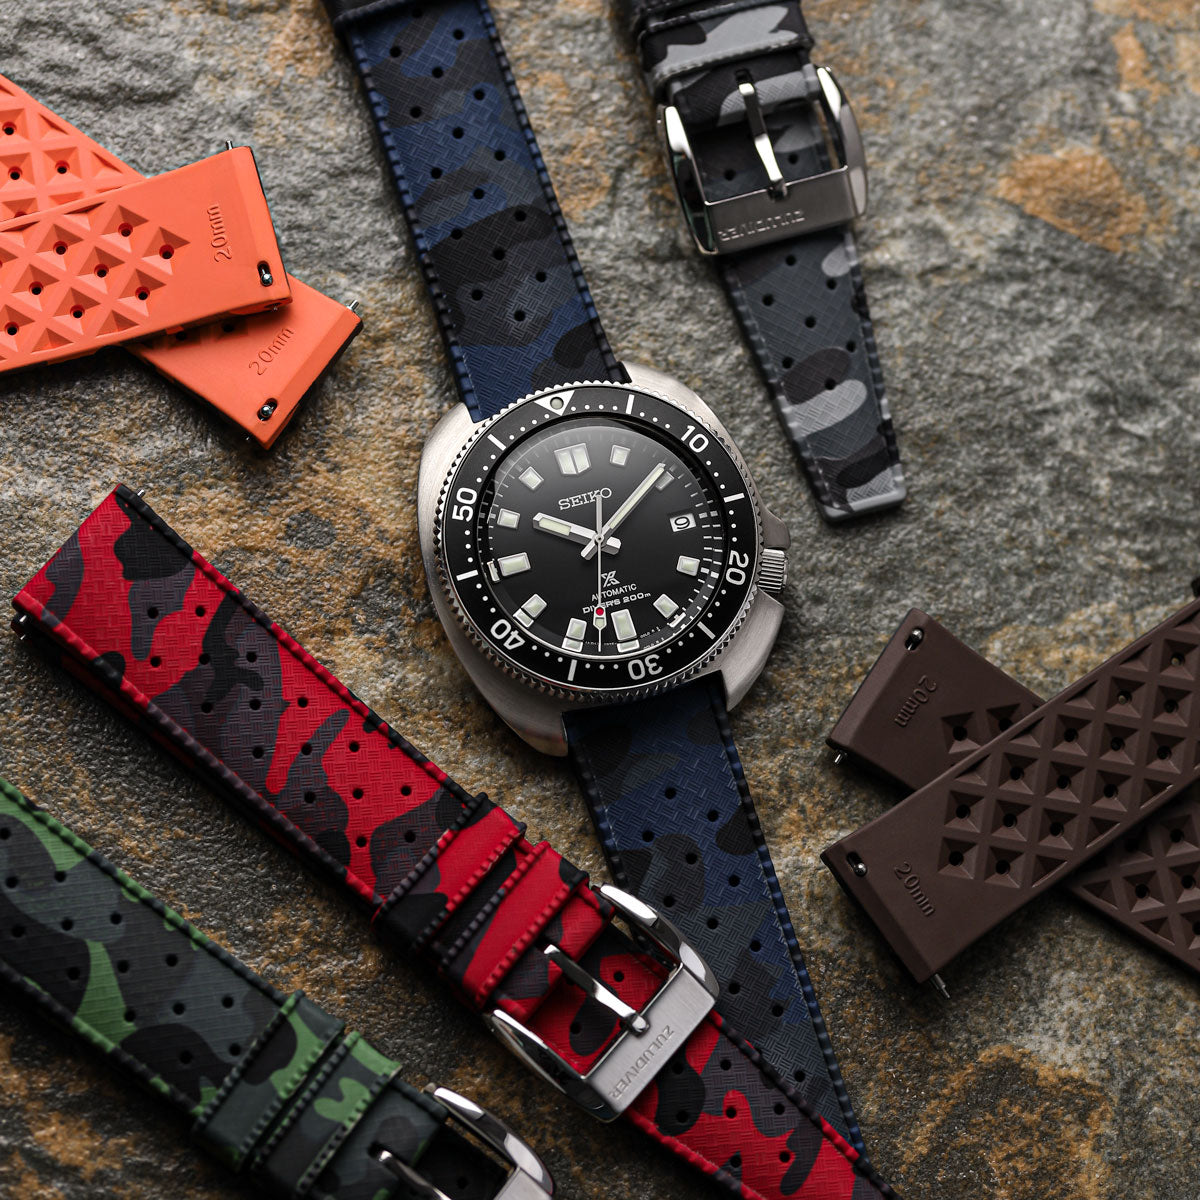 ZULUDIVER Tropical Style Camo Rubber Watch Strap - Blue - additional image 2